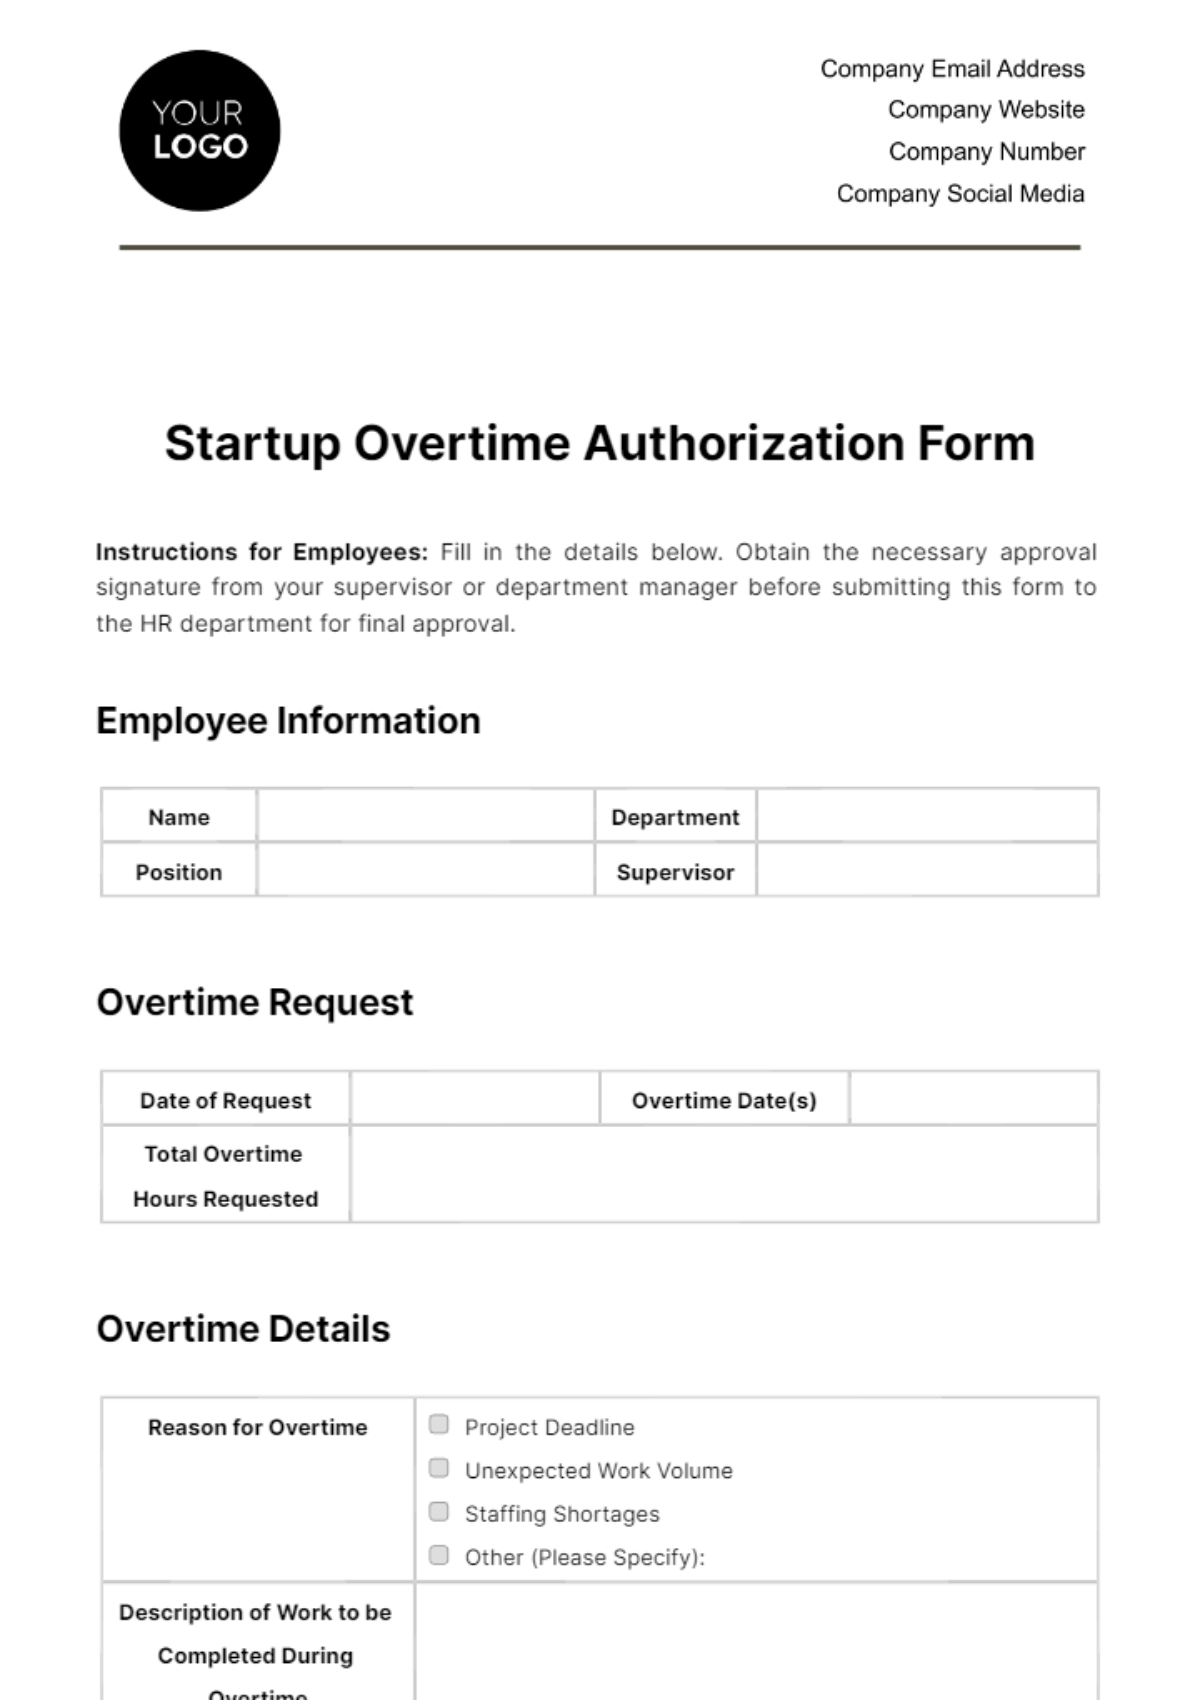 Startup Overtime Authorization Form Template